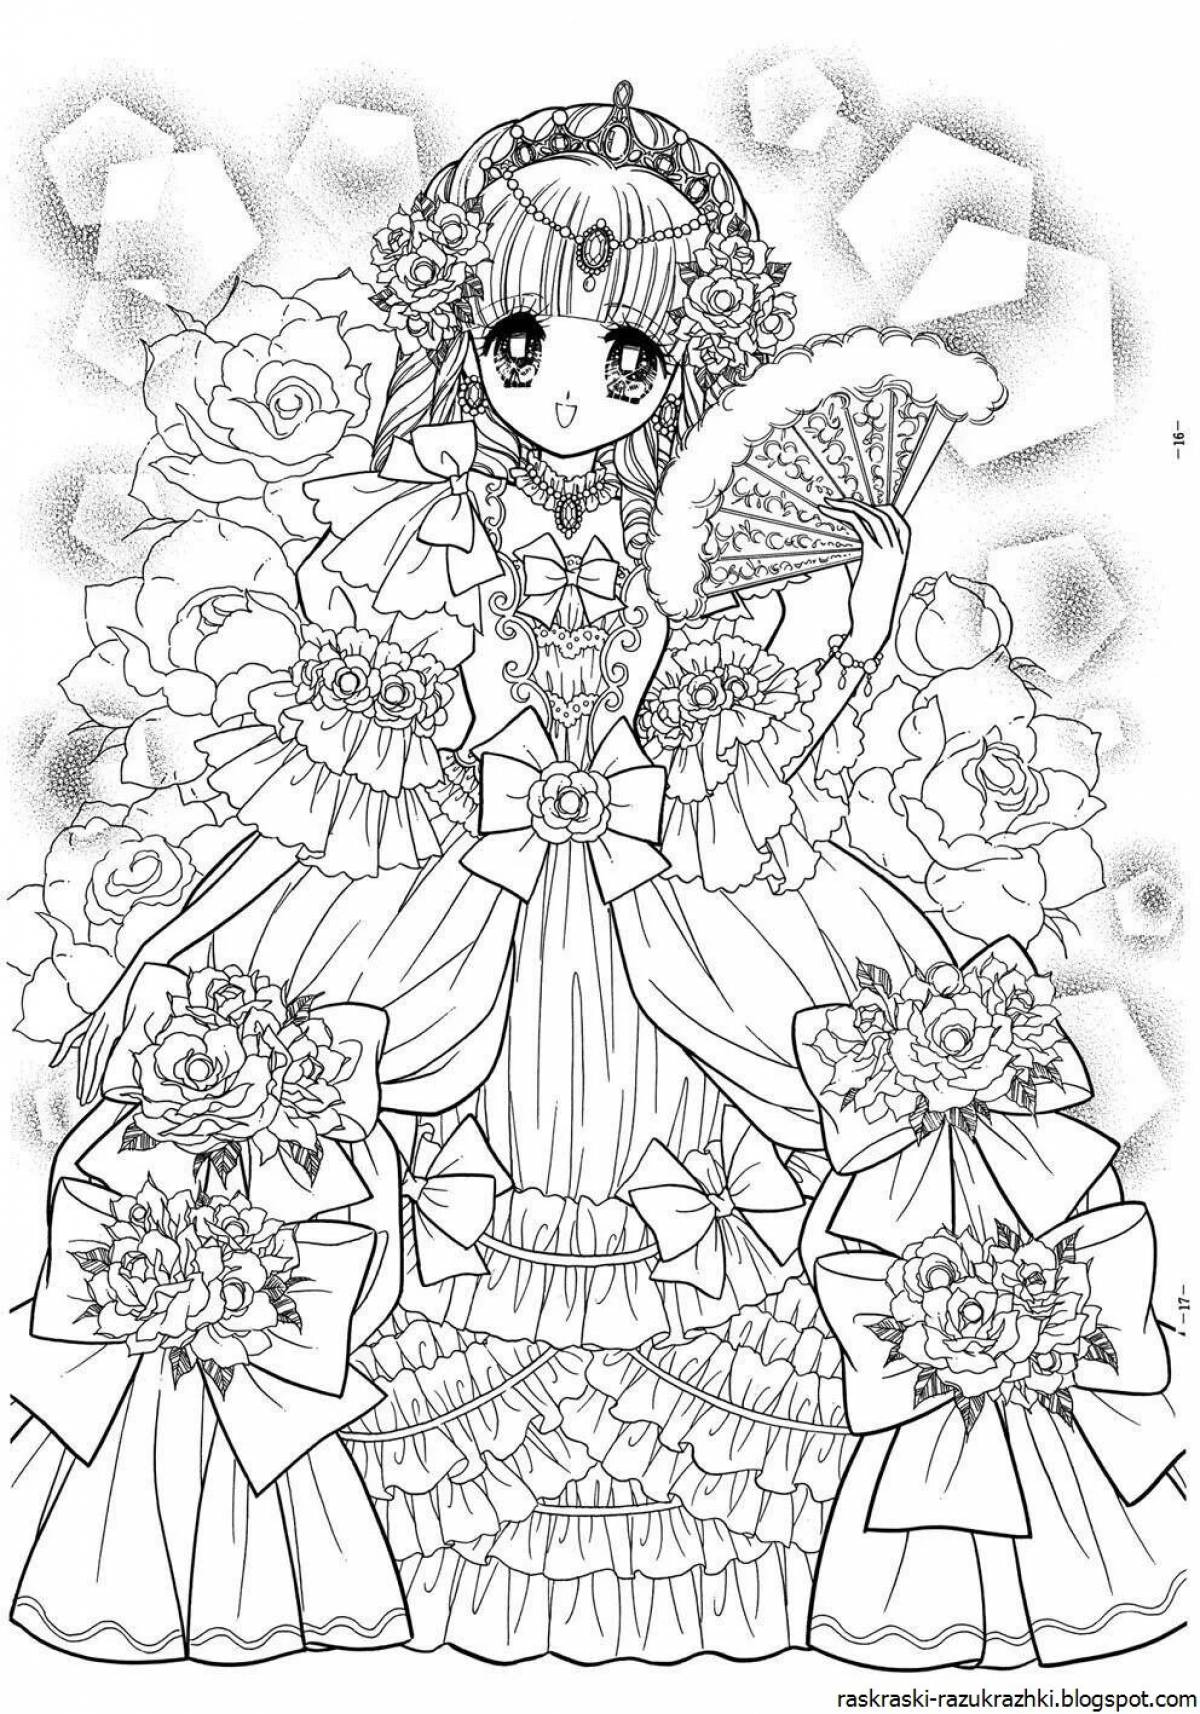 Awesome anime coloring pages for girls